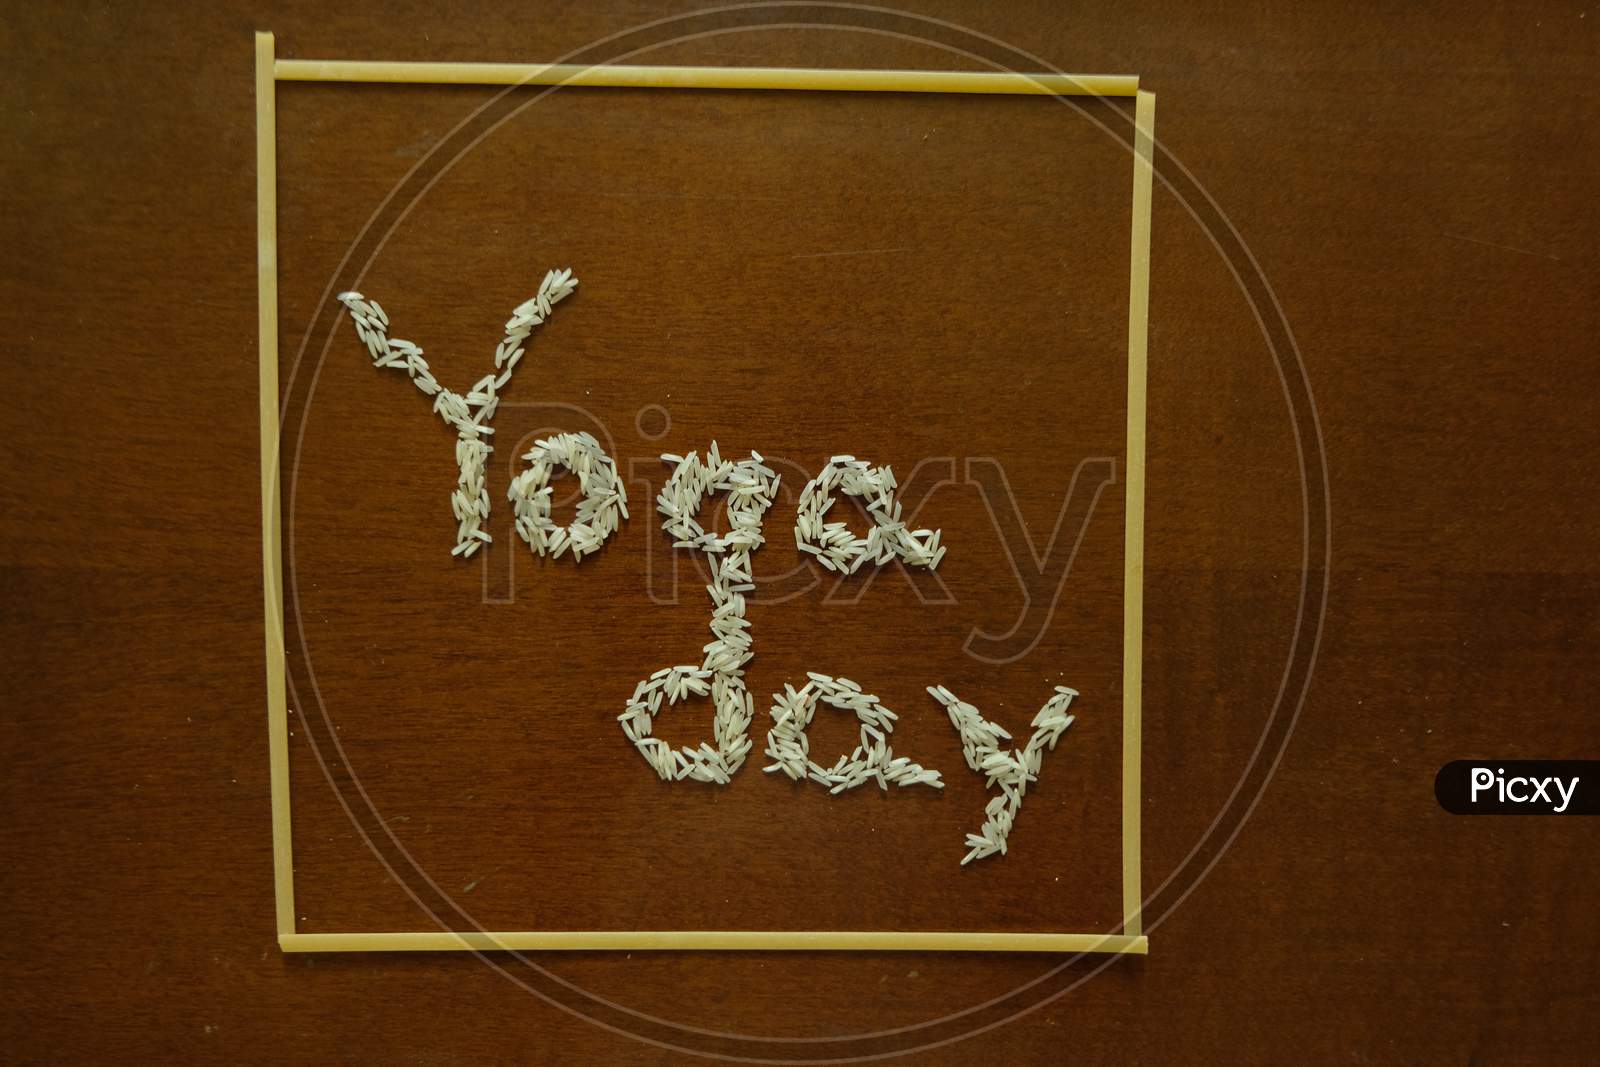 Yoga day text with spaghetti on a dark background